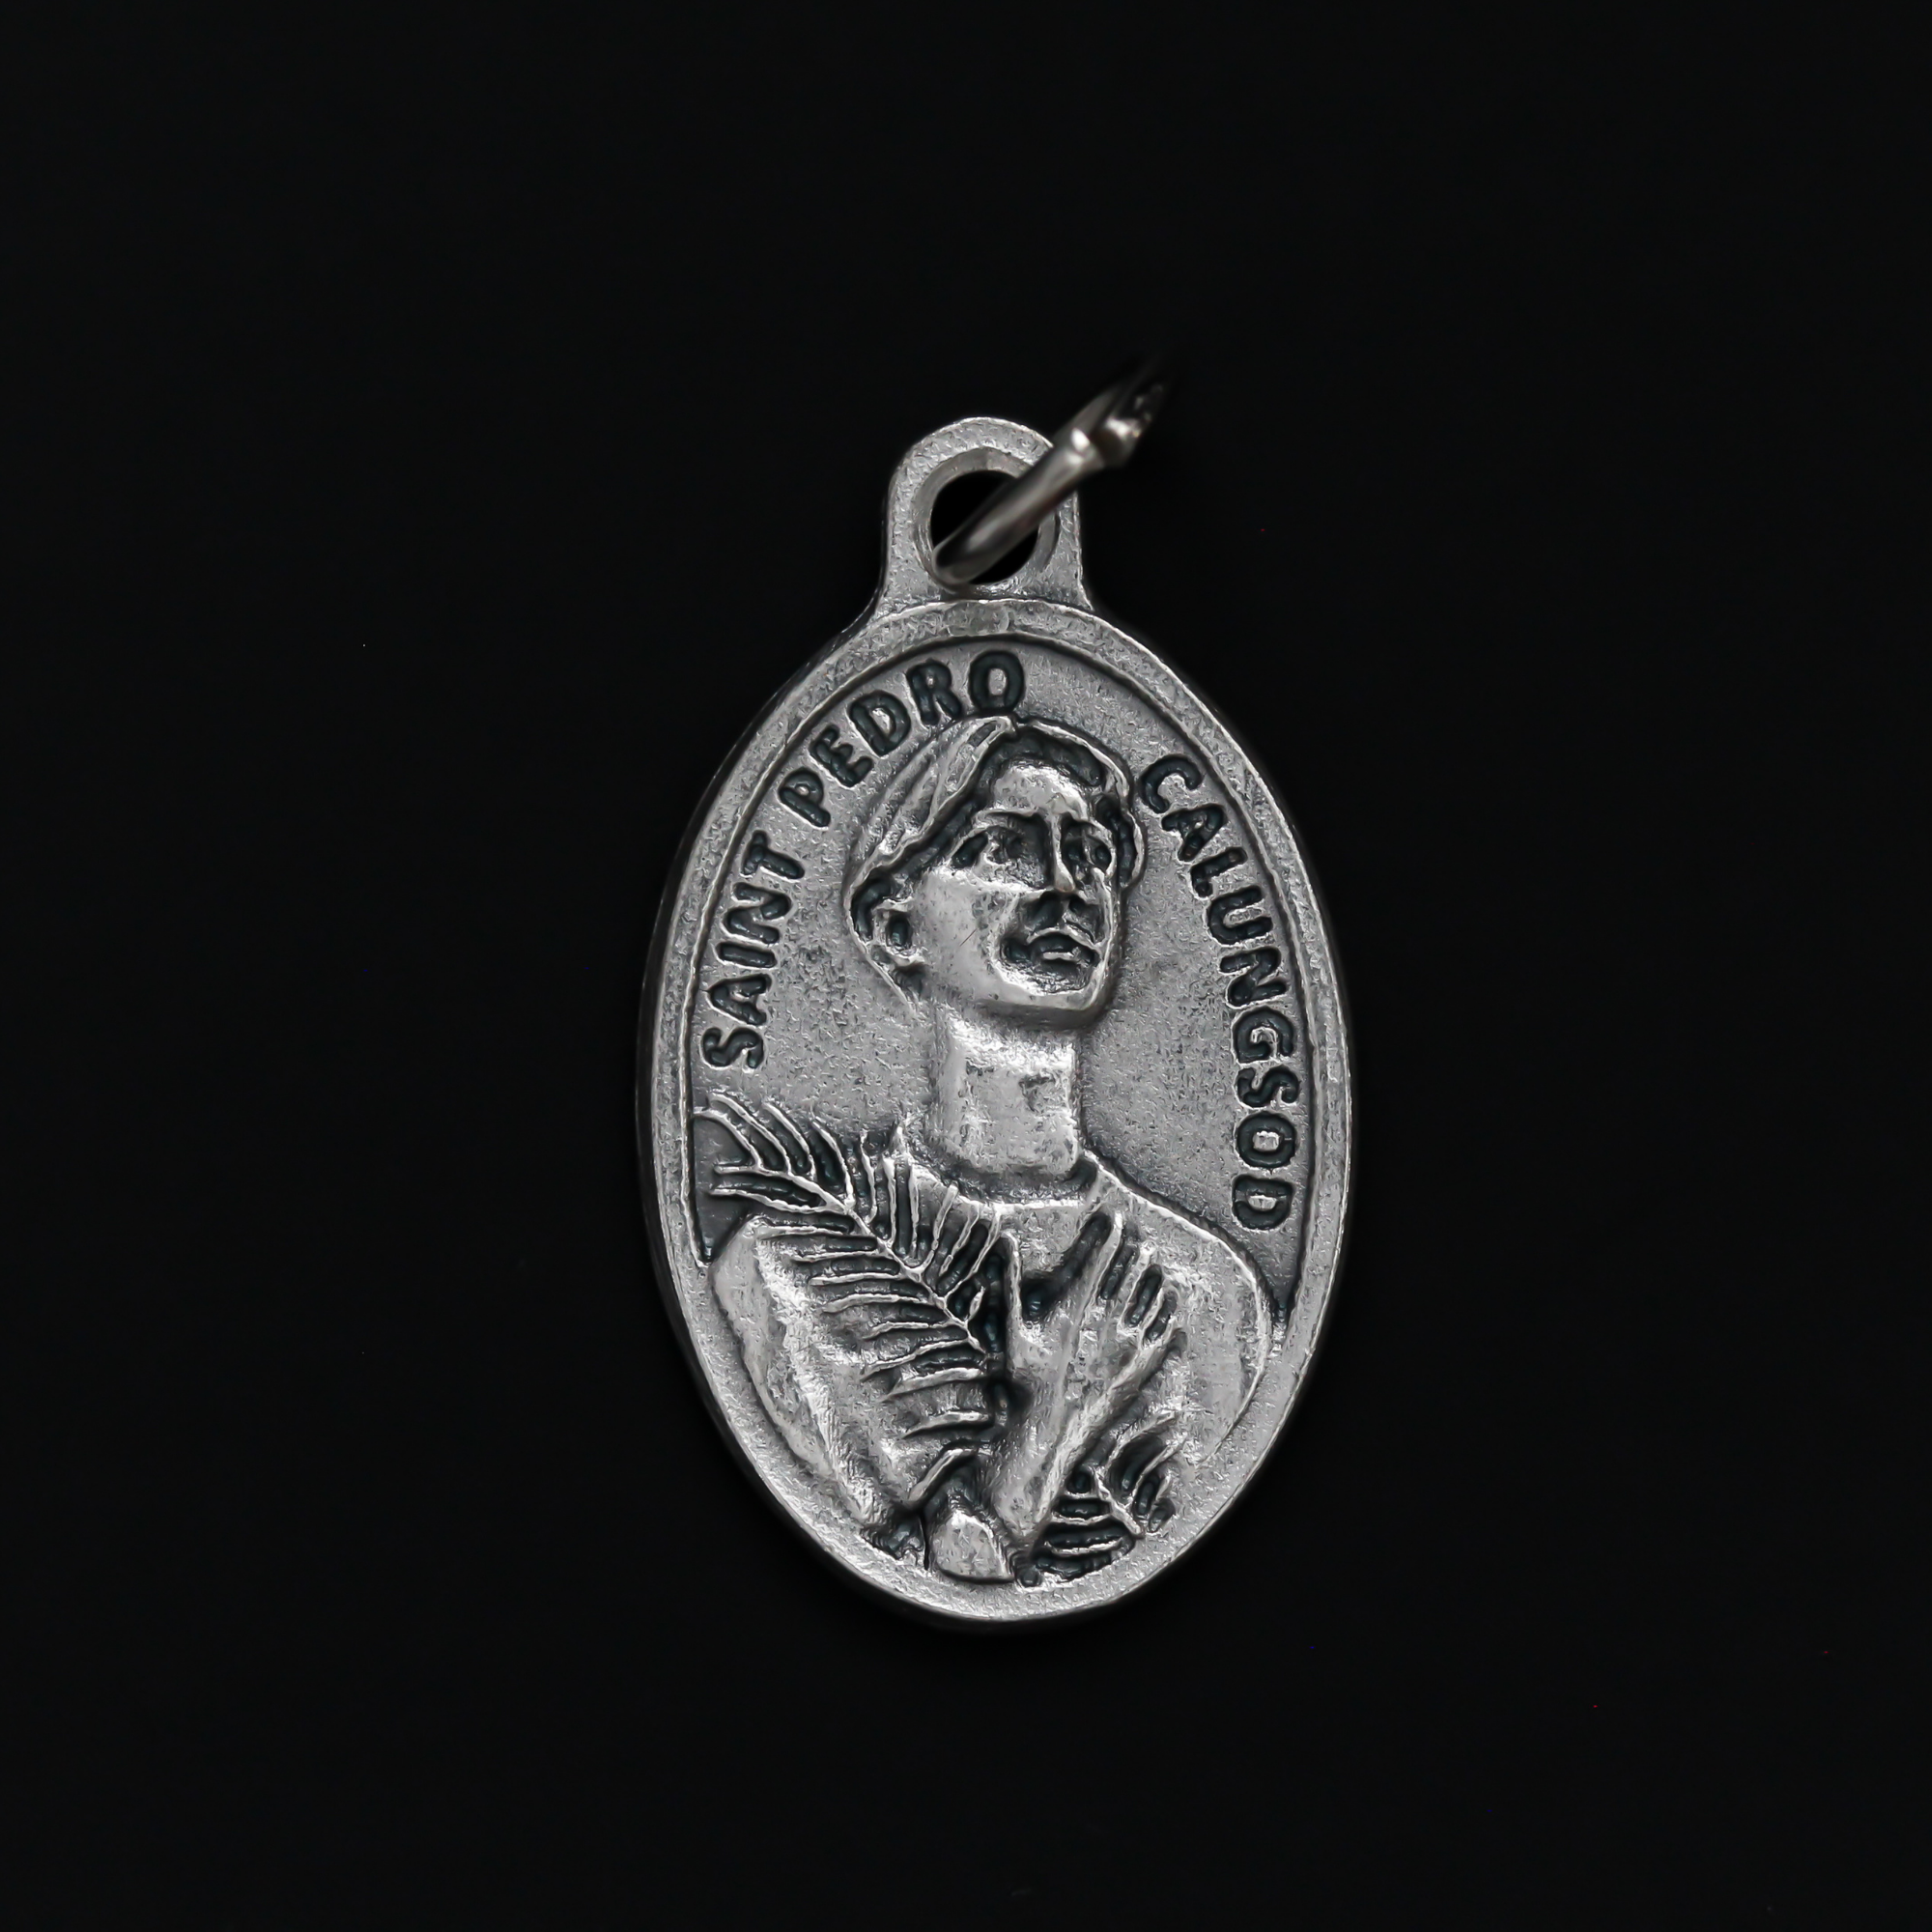 Saint Pedro Calungsod medal that depicts the saint on the front and is marked "Pray For Us" on the back